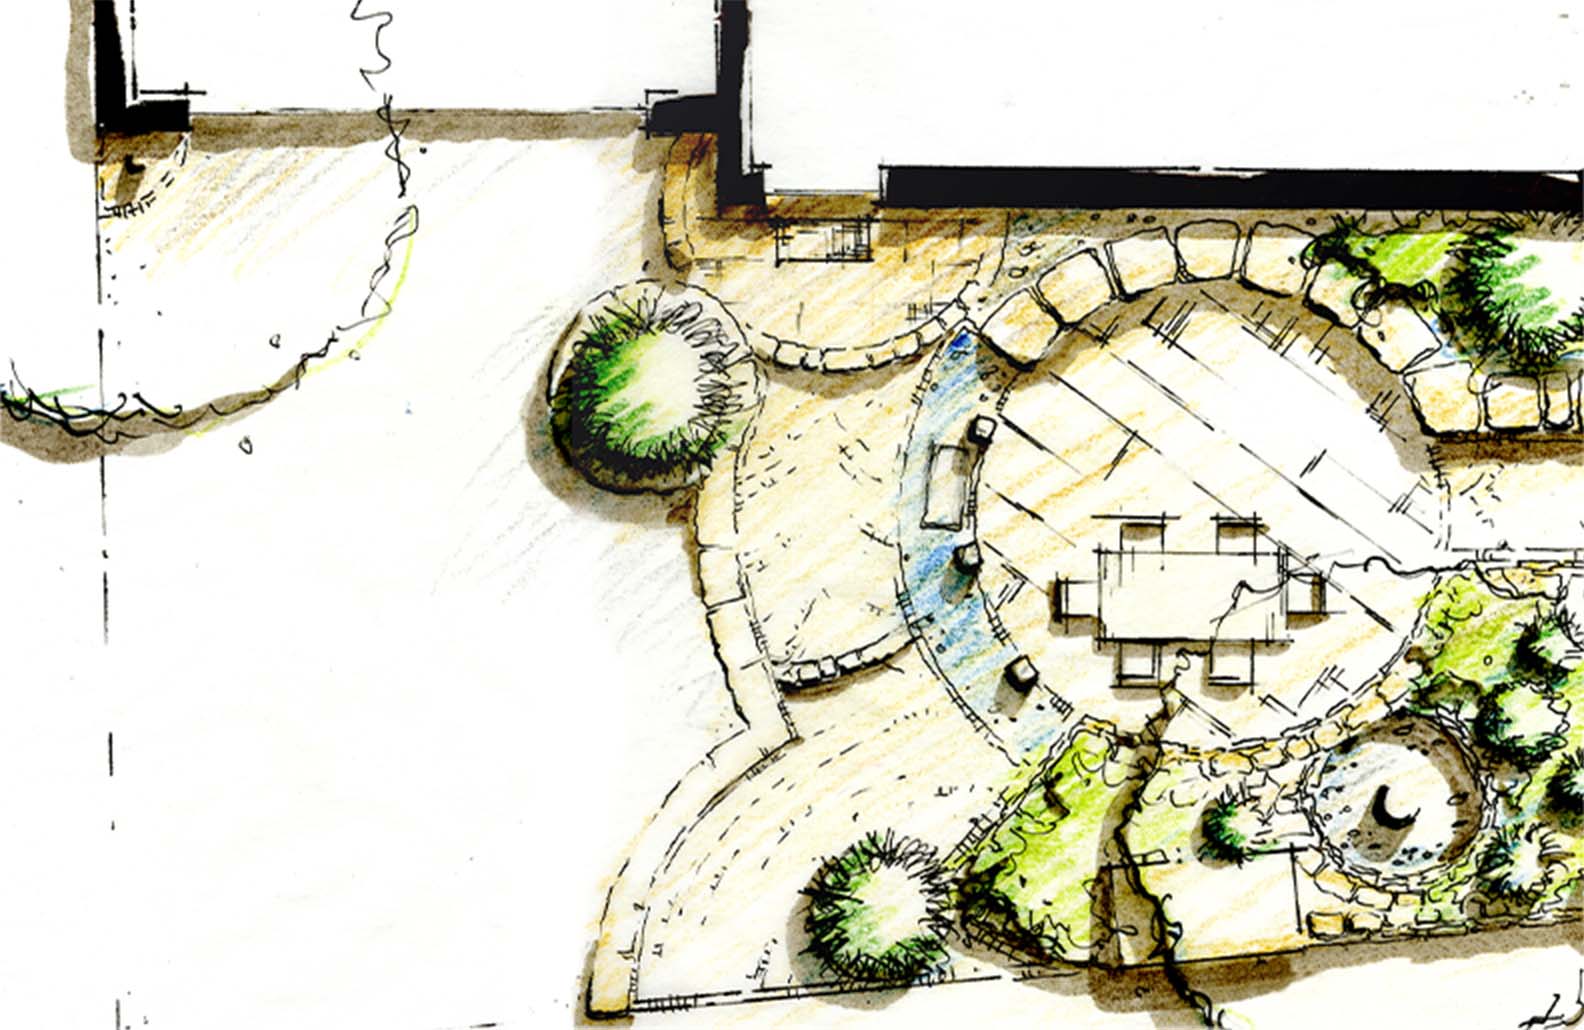 A top down view of a Designed Garden